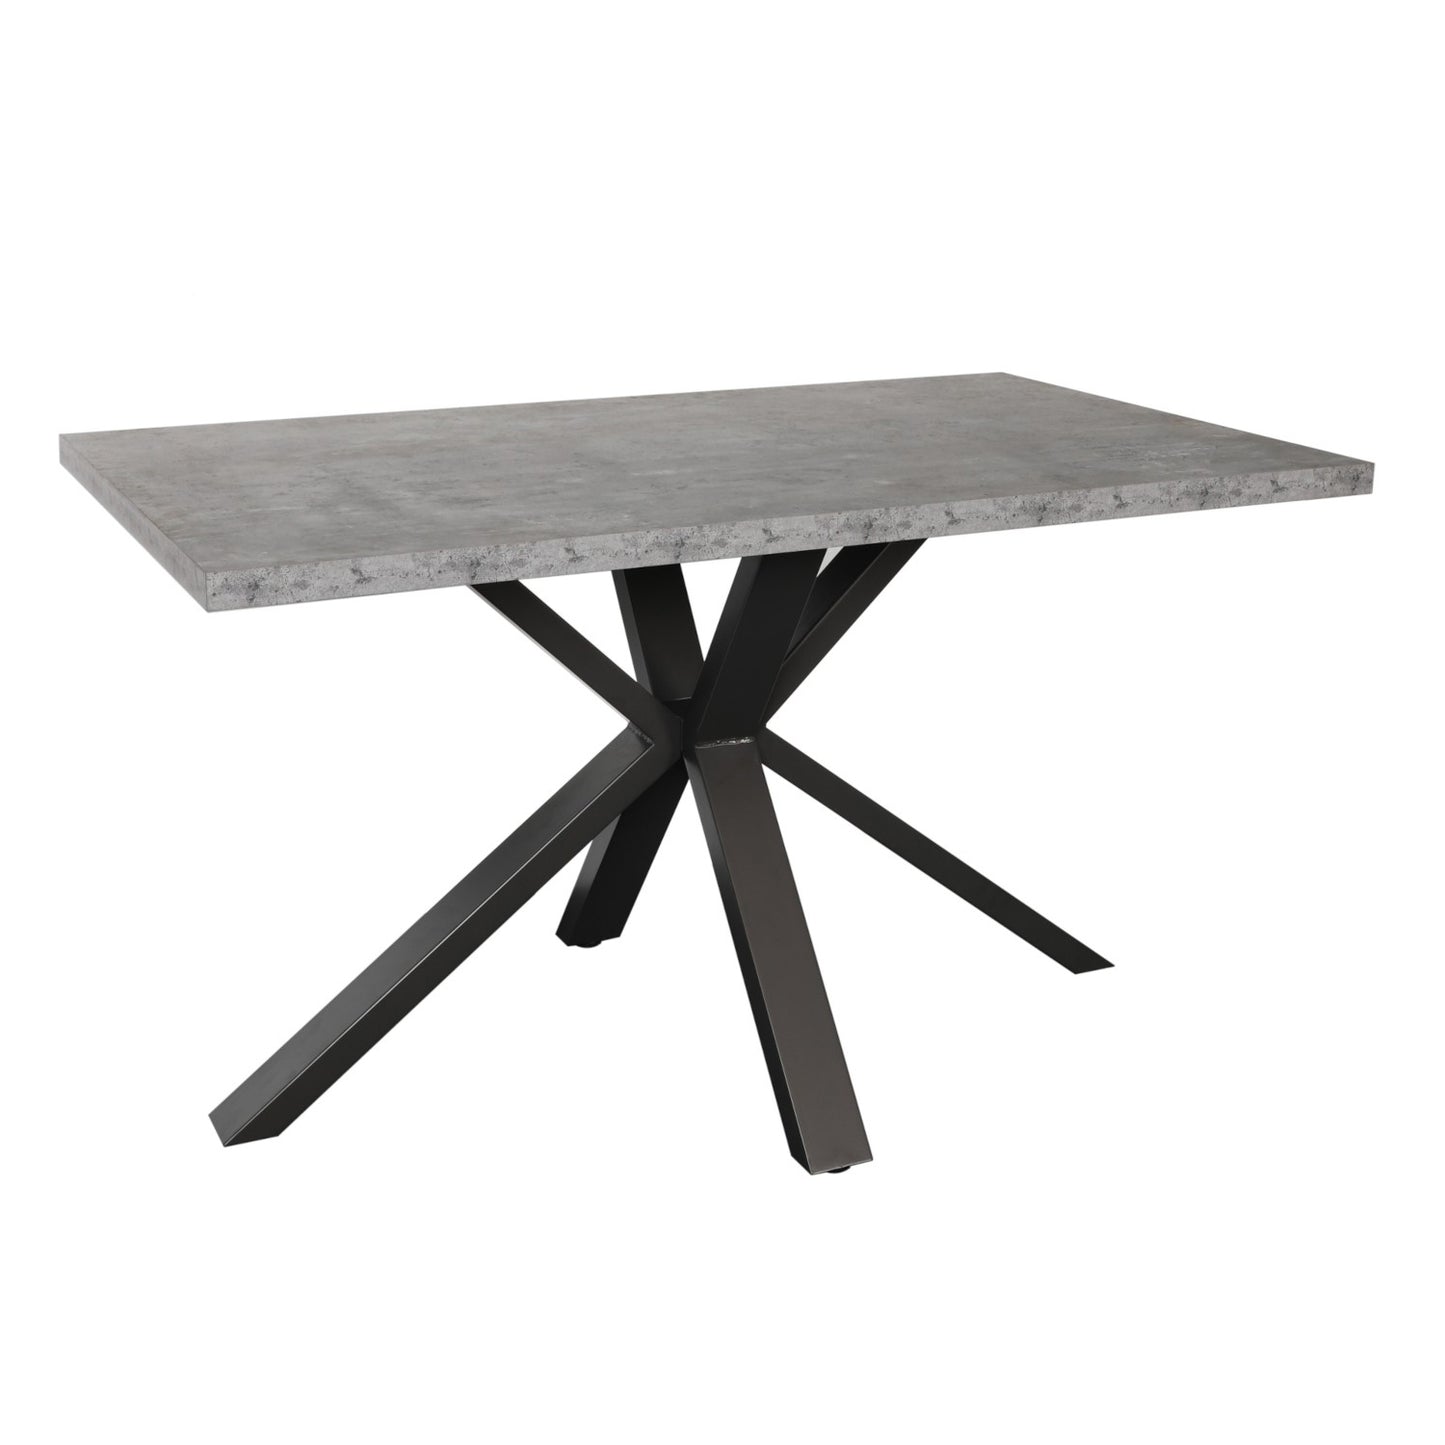 Elsworthy Stone Effect - Compact Dining Table